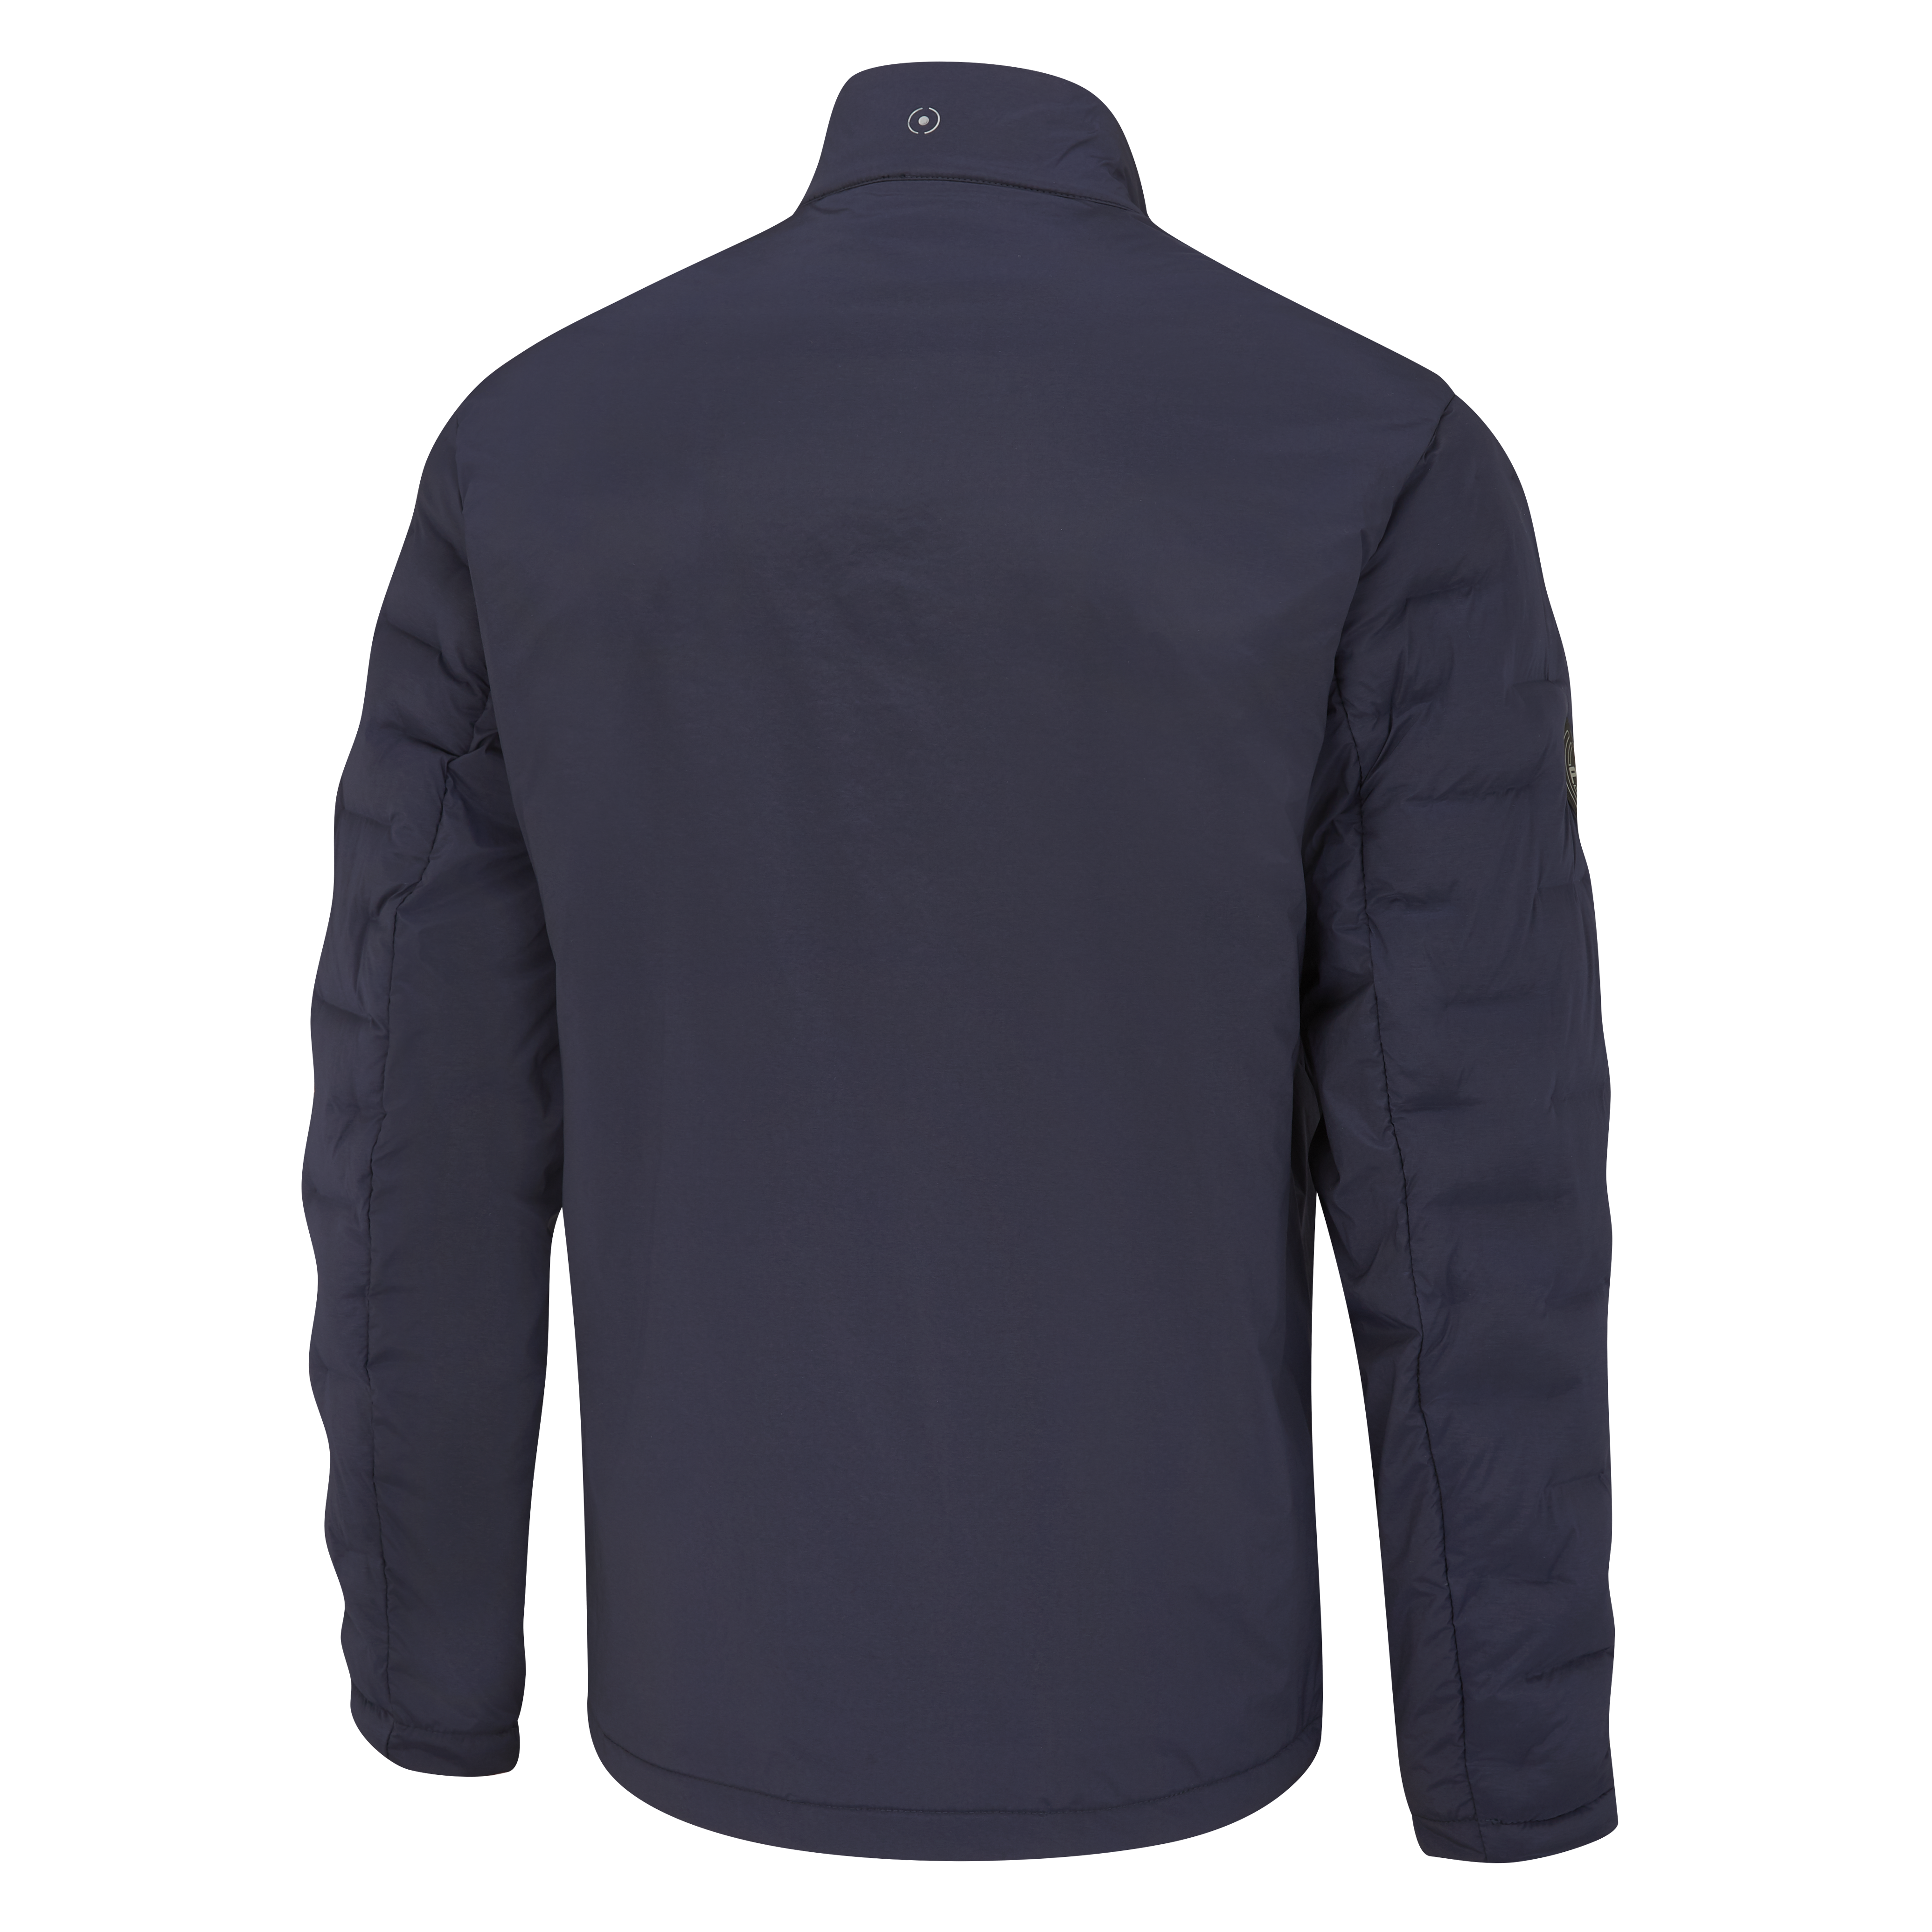 Norse S5 Jacket